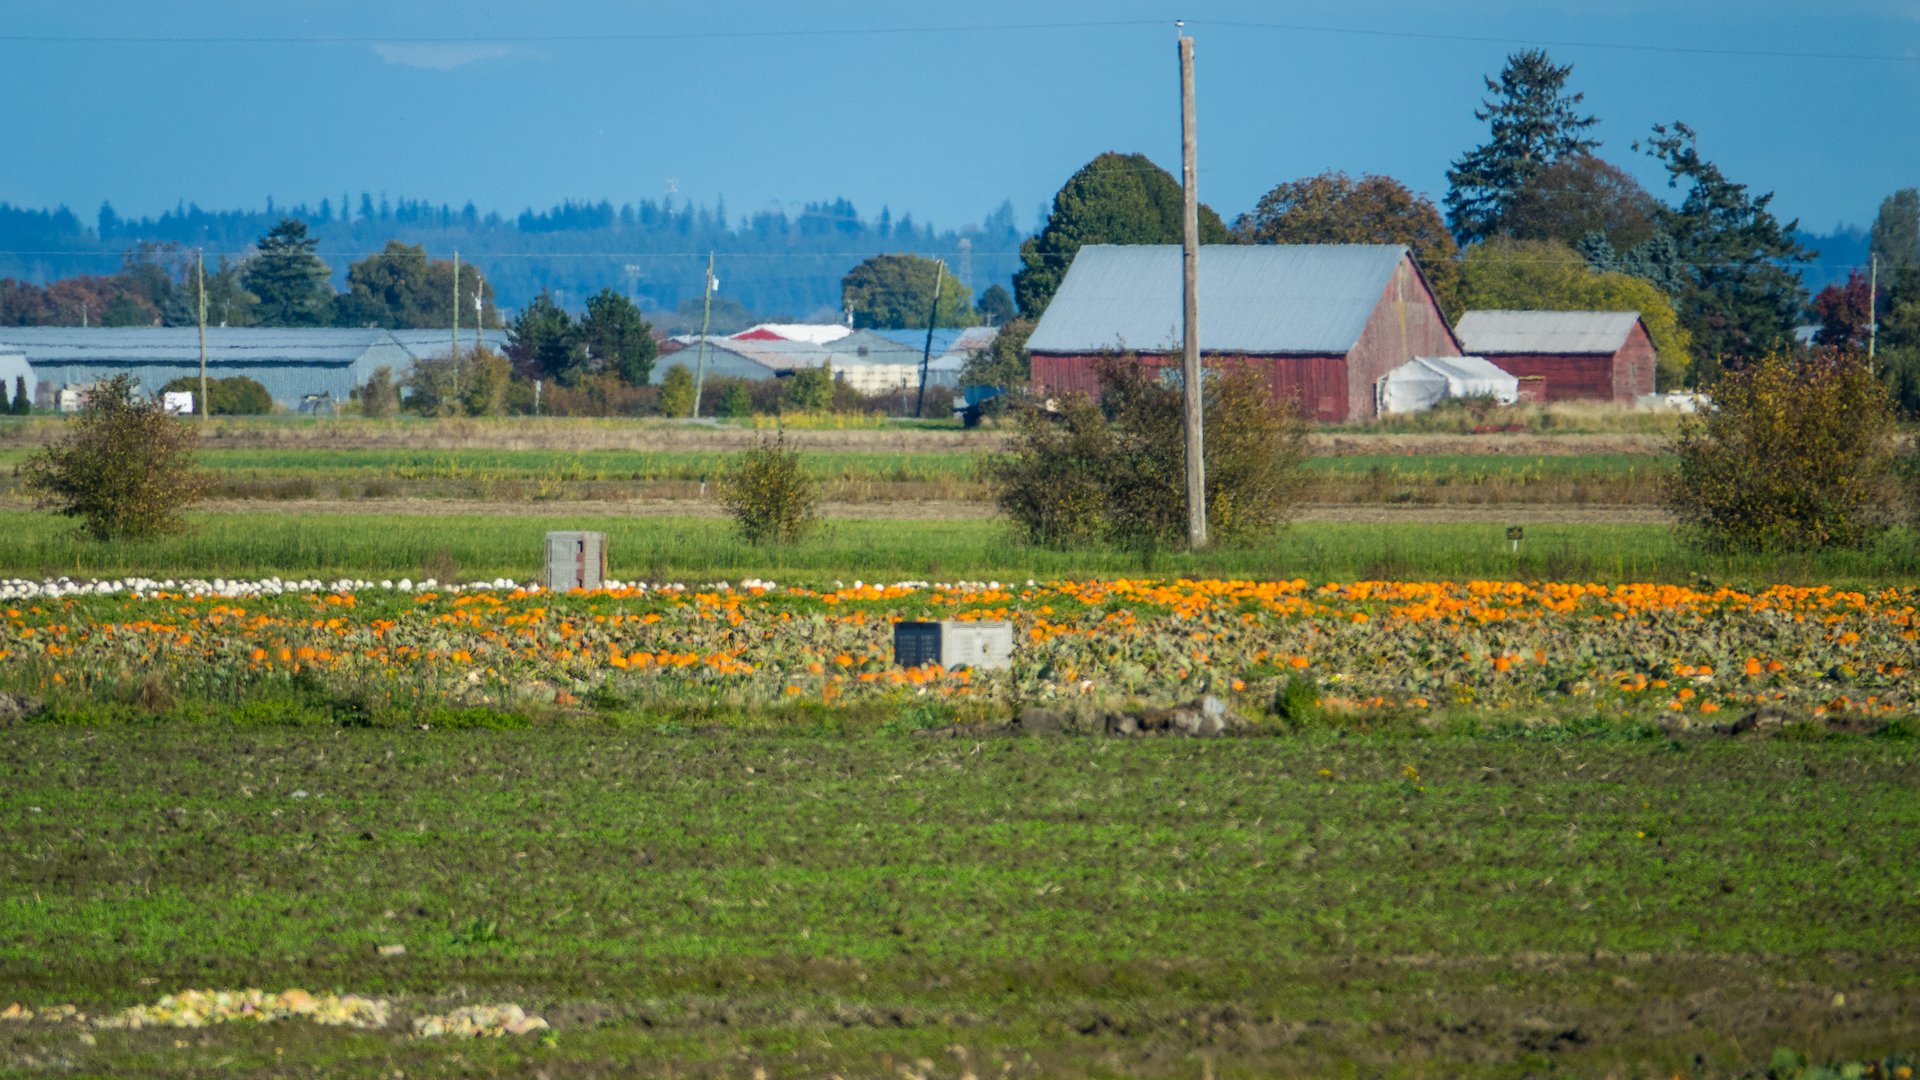  IN some places, the fields are still full of pumpkins. 